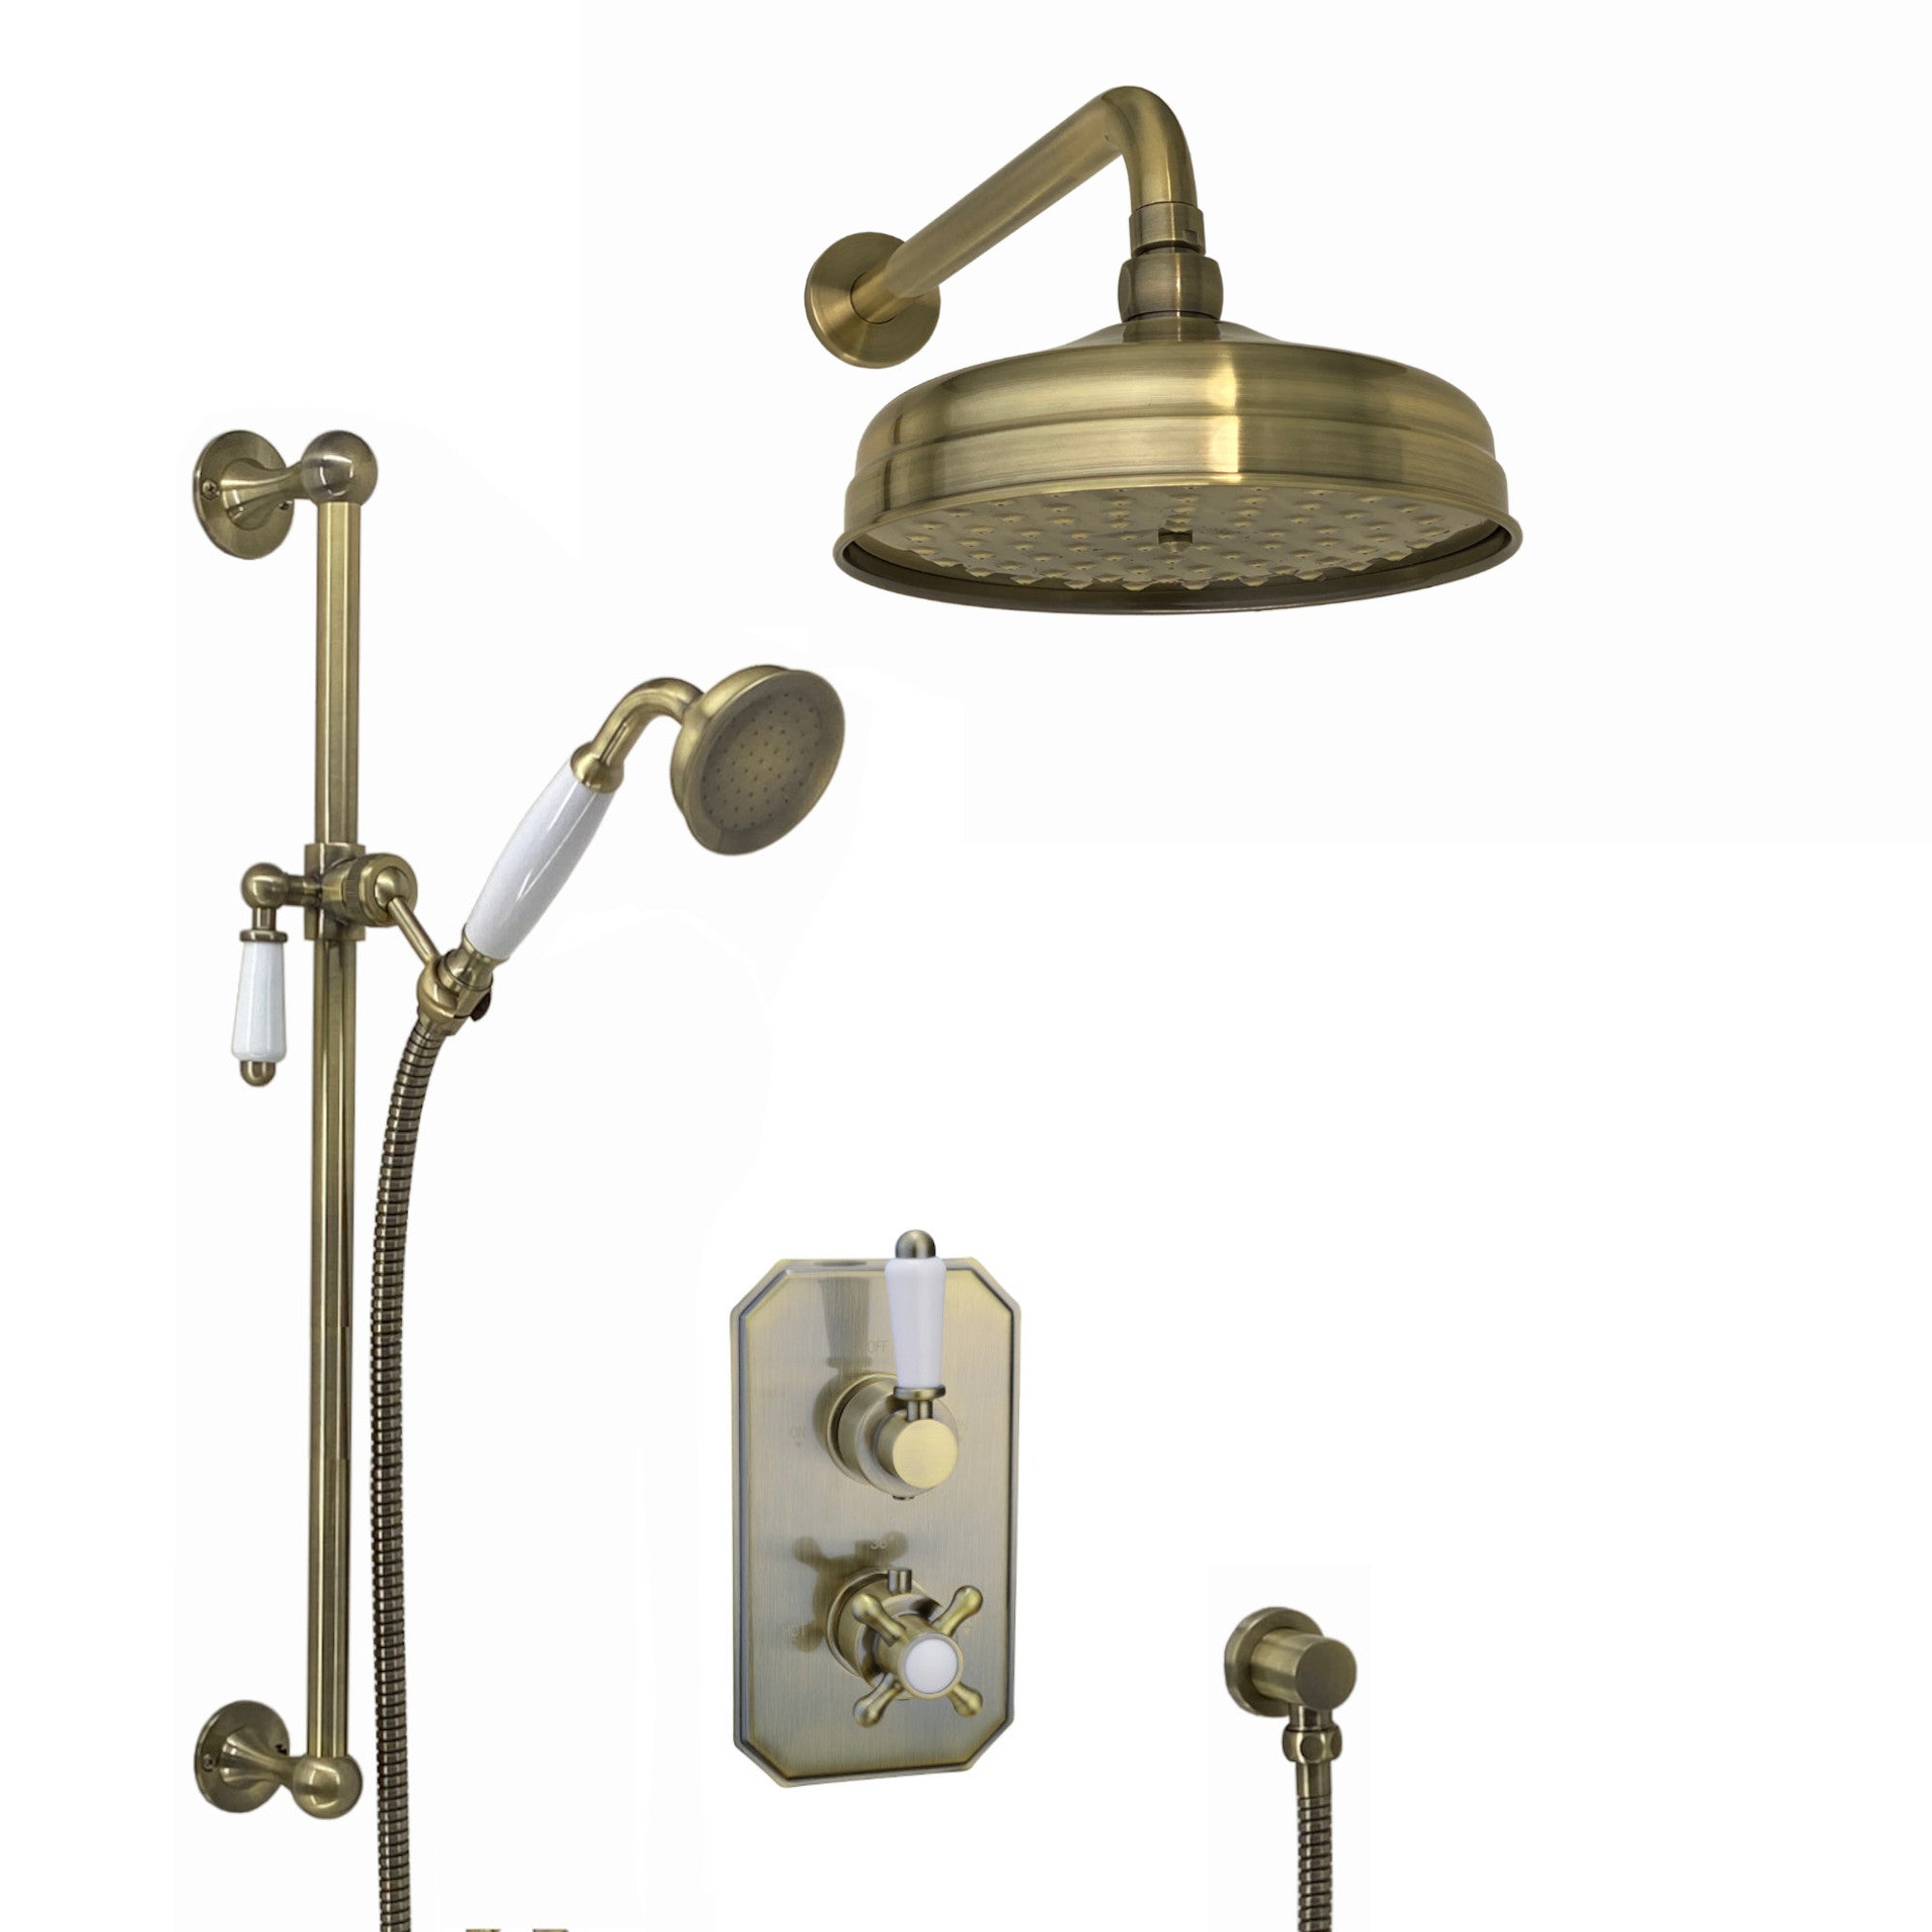 Regent Traditional Crosshead And White Lever Concealed Thermostatic Shower Set Incl. Twin Valve, Wall Fixed 8" Shower Head, Slider Rail Kit - Antique Bronze (2 Outlet)